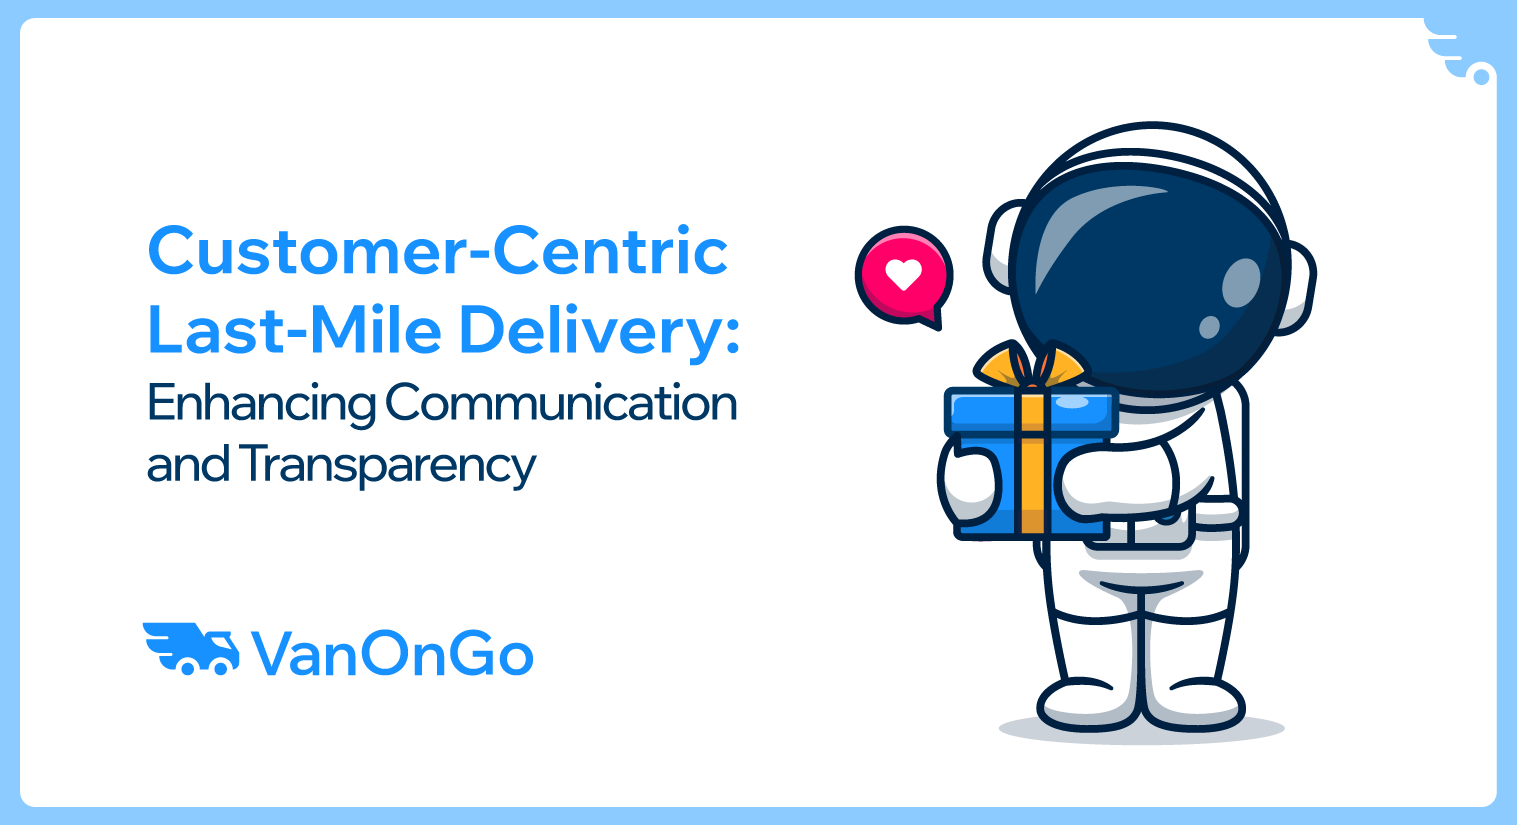 Customer-Centric Last-Mile Delivery: Enhancing Communication and Transparency 